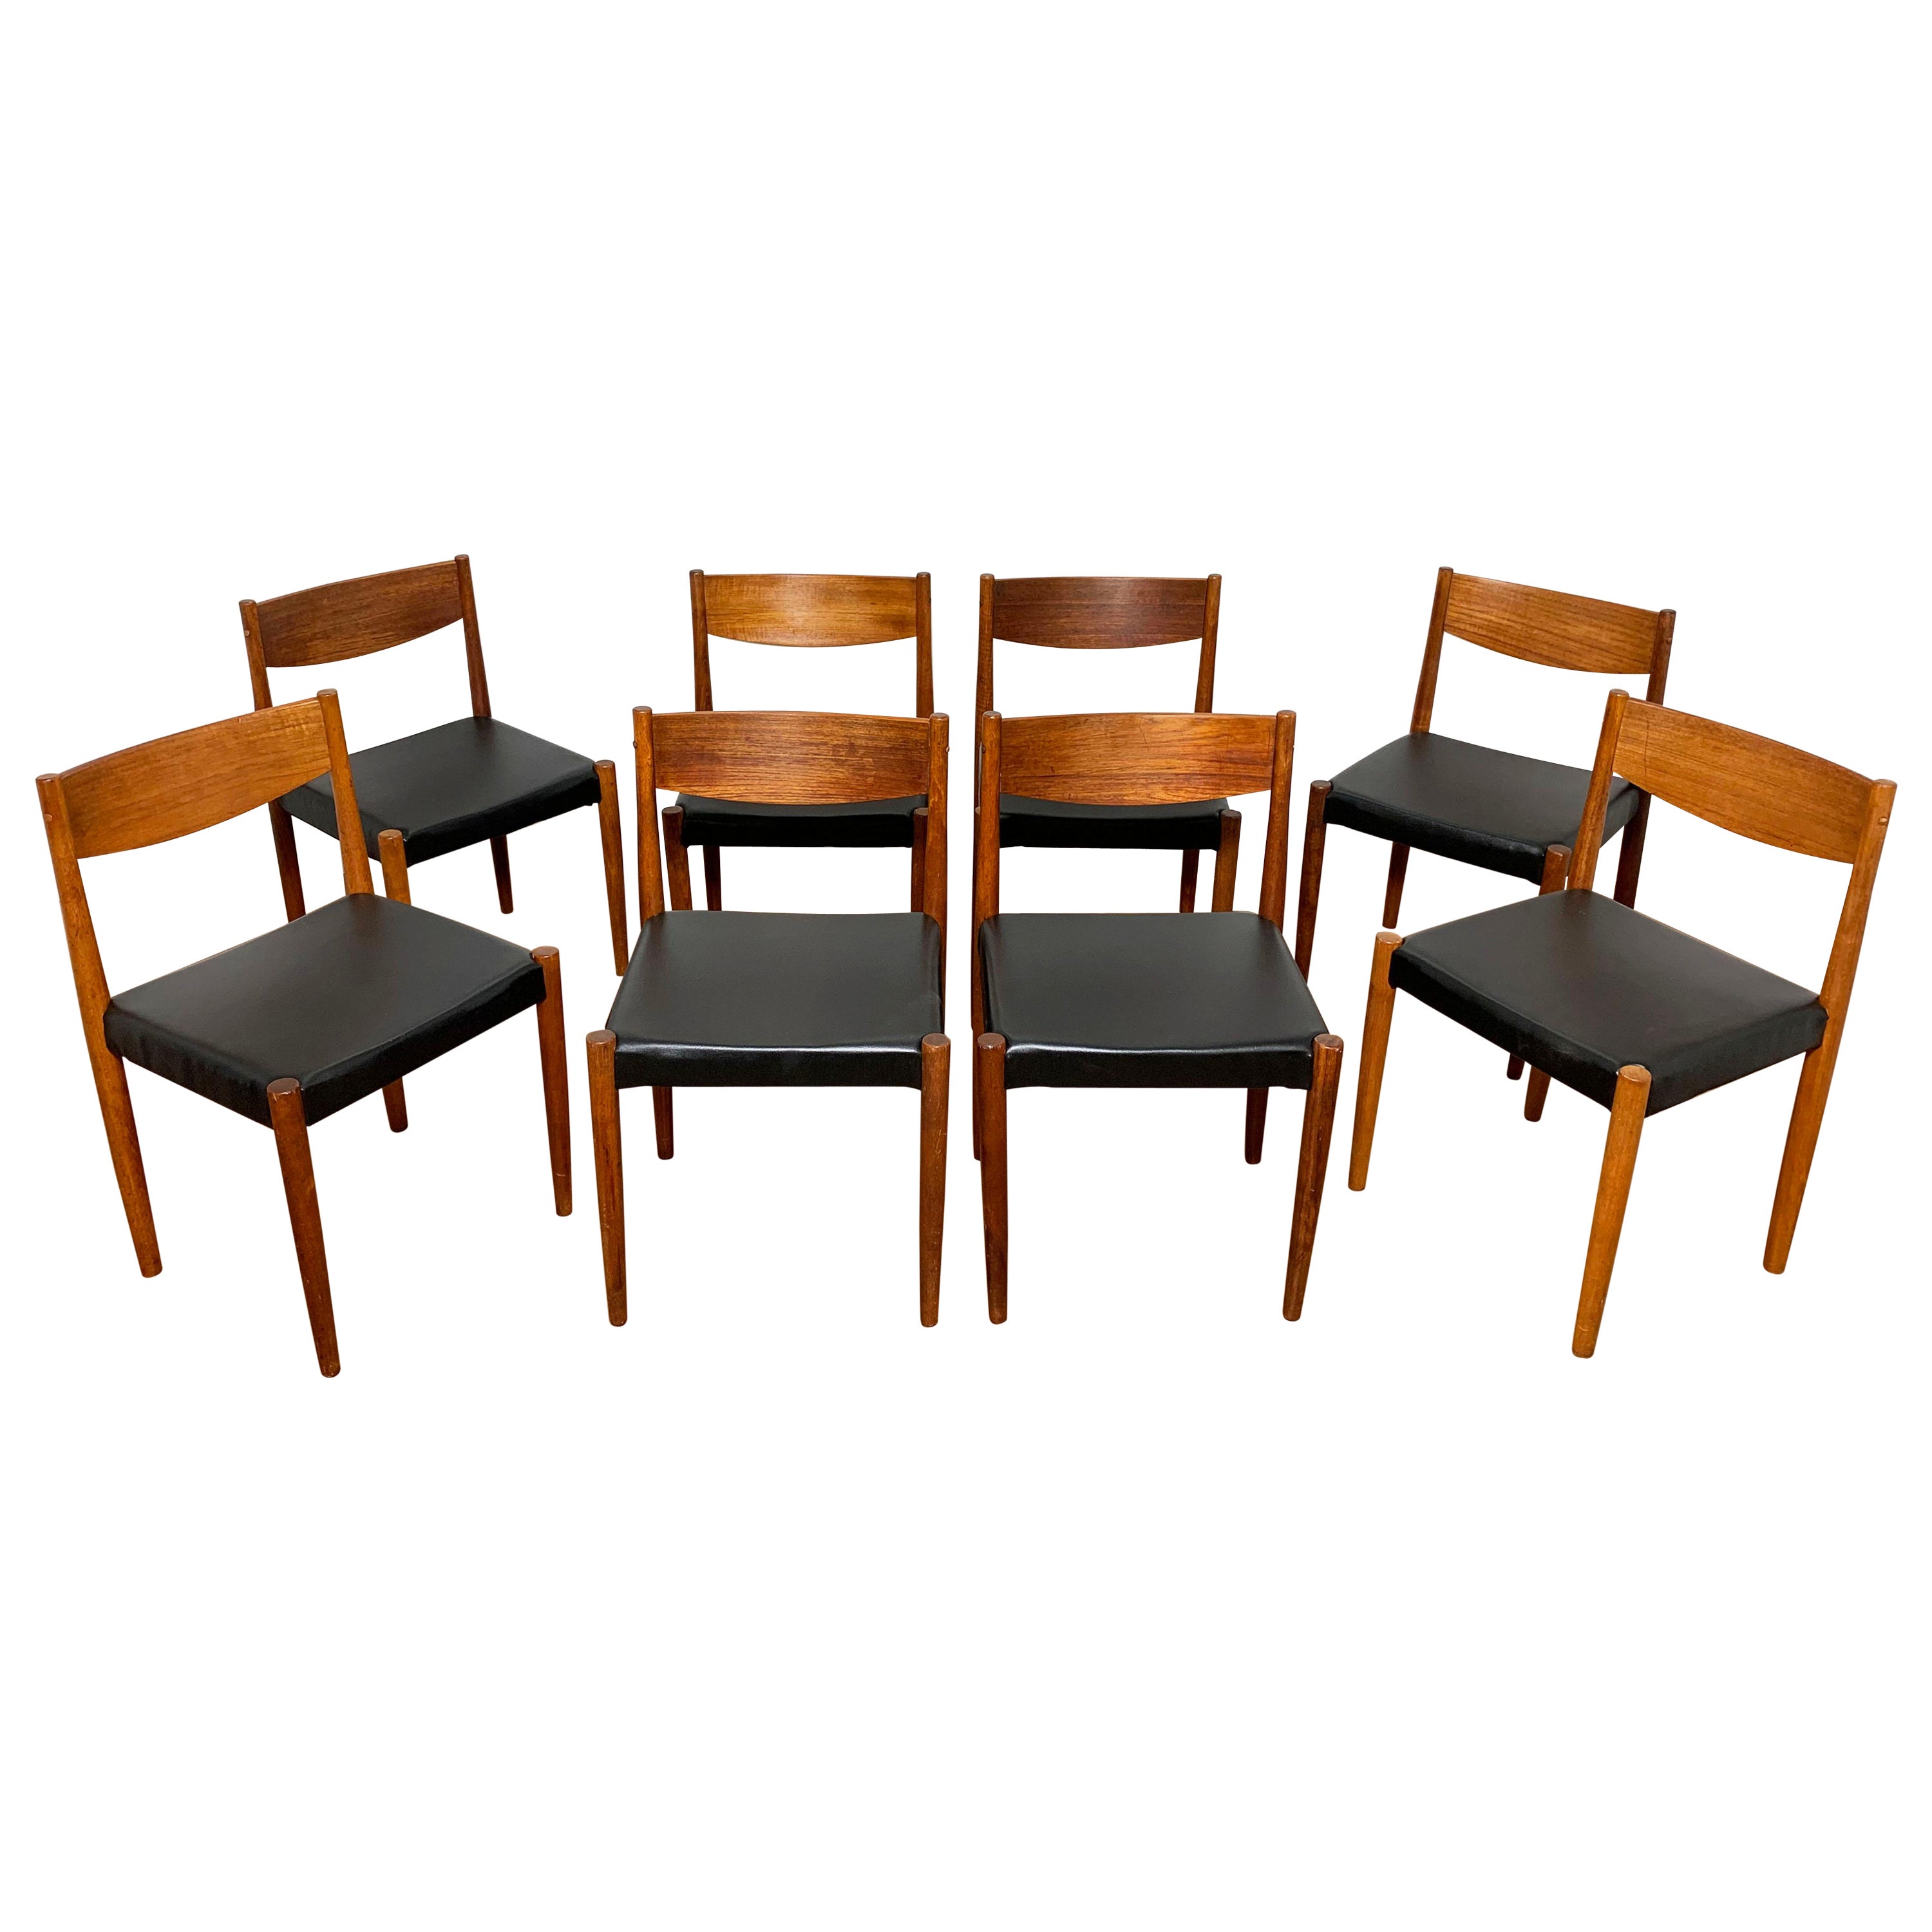 Set of Eight Poul Volther for Frem Rojle Danish Teak Dining Chairs, circa 1960s